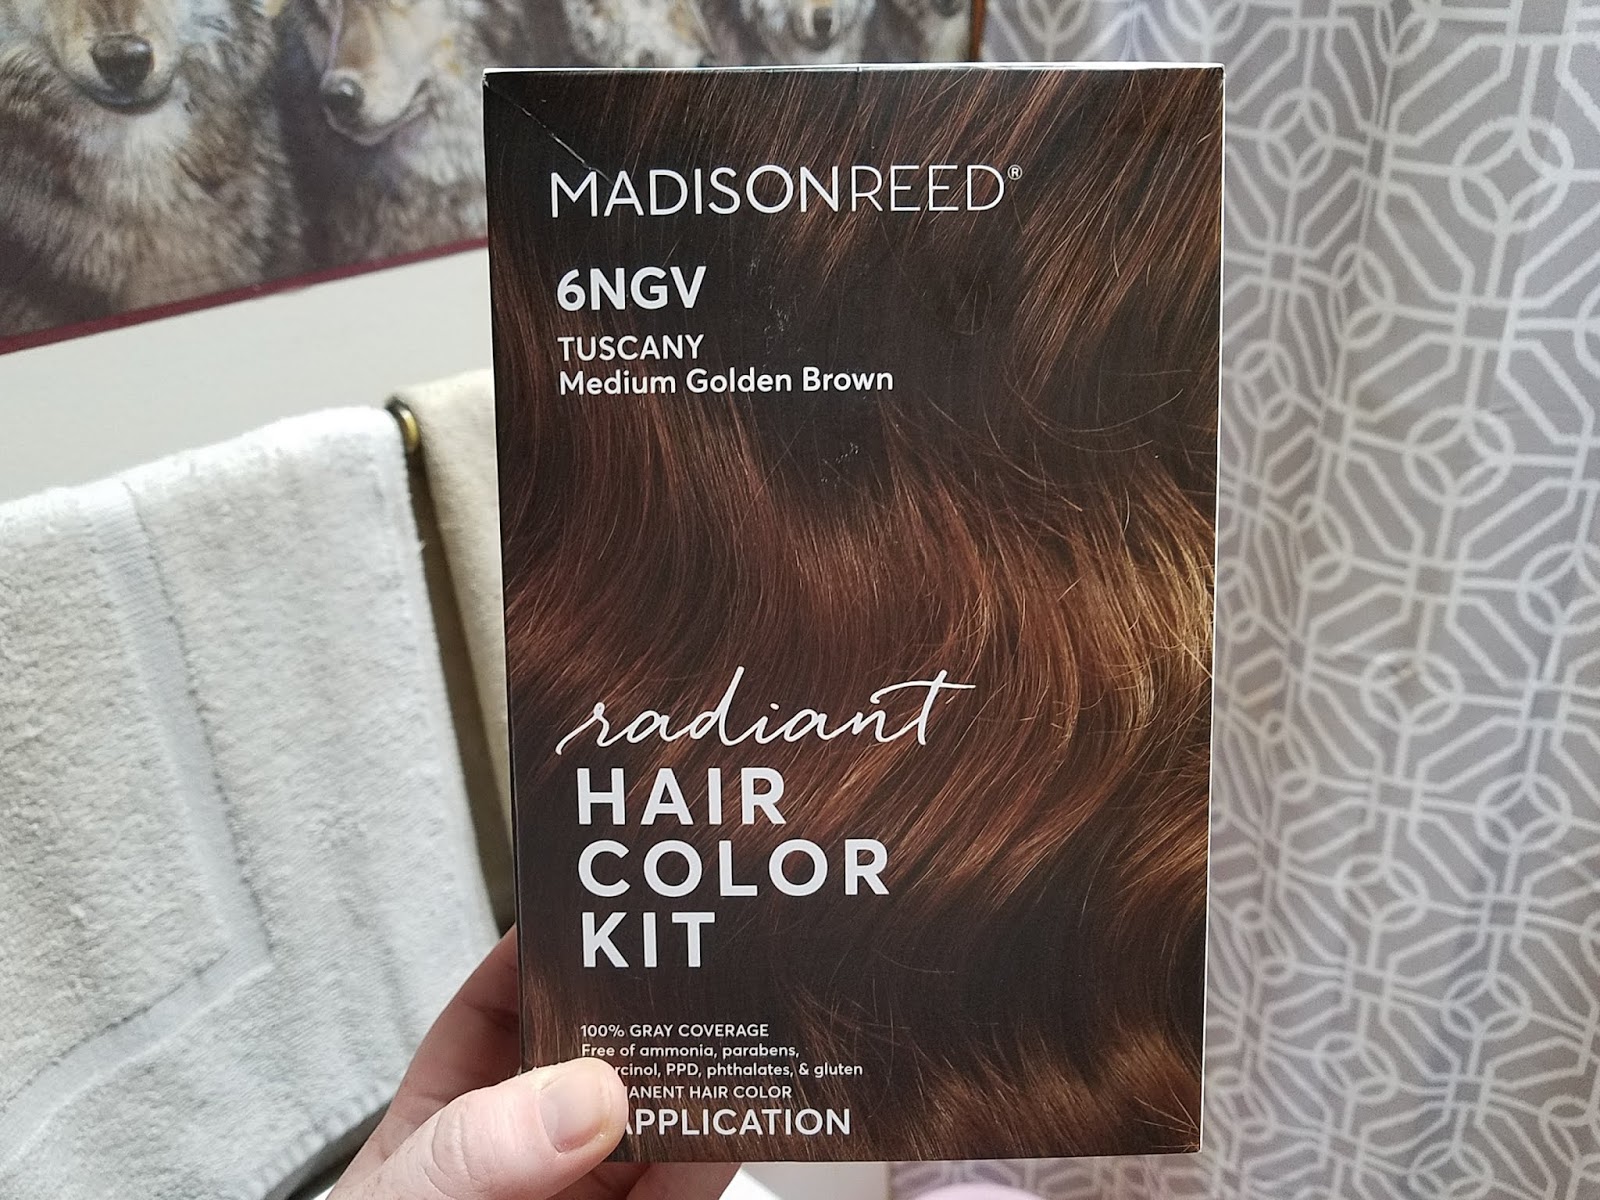 Madison Reed Radiant hair color review | a hundred tiny wishes